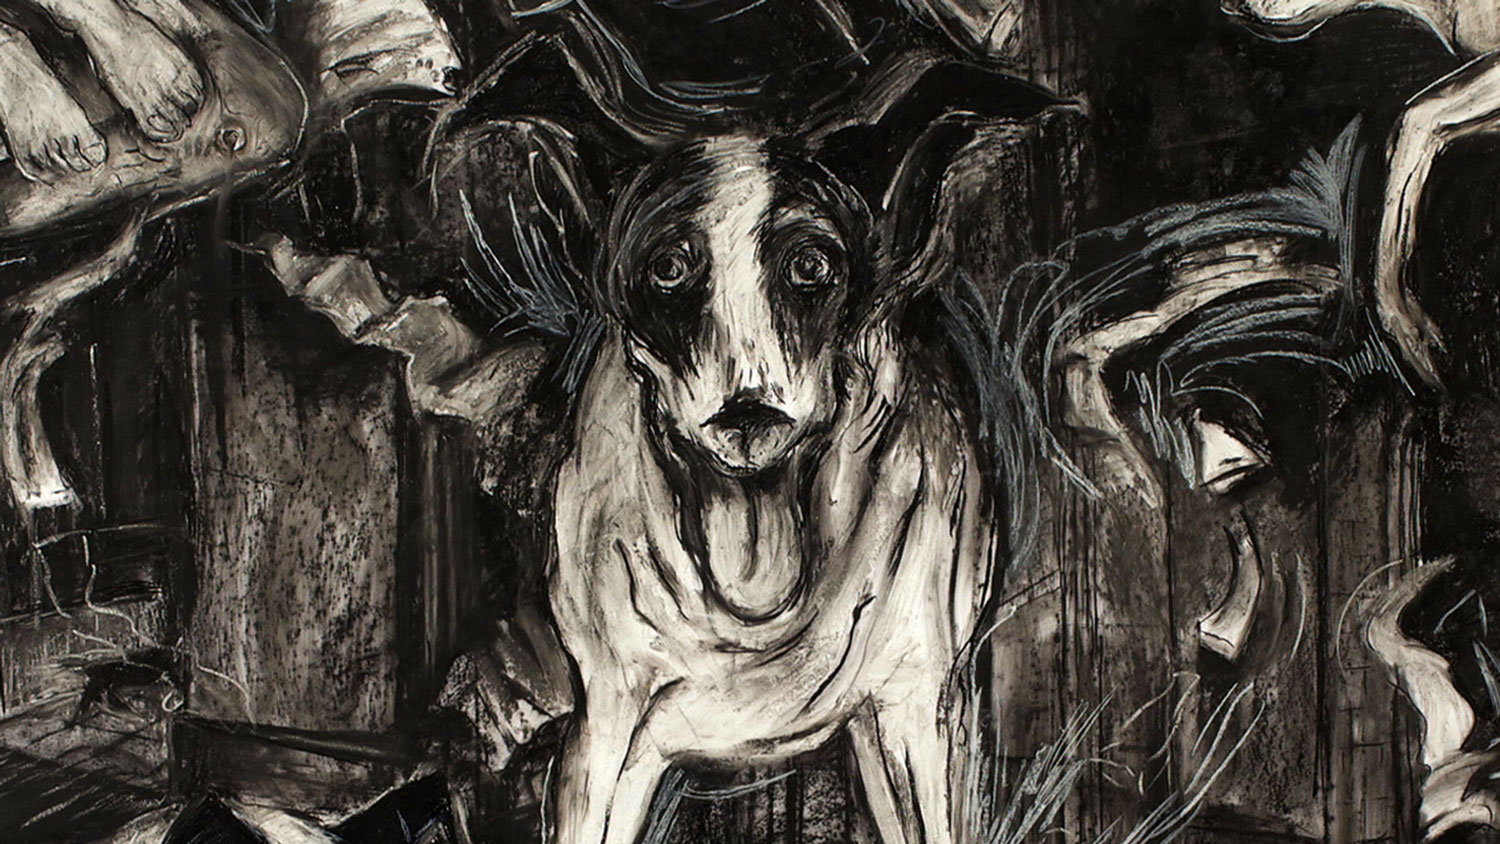 A black and white chalk sketch of Laurie Anderson's dog, Lolabelle looking directly at the viewer with tongue out and ears erect. 